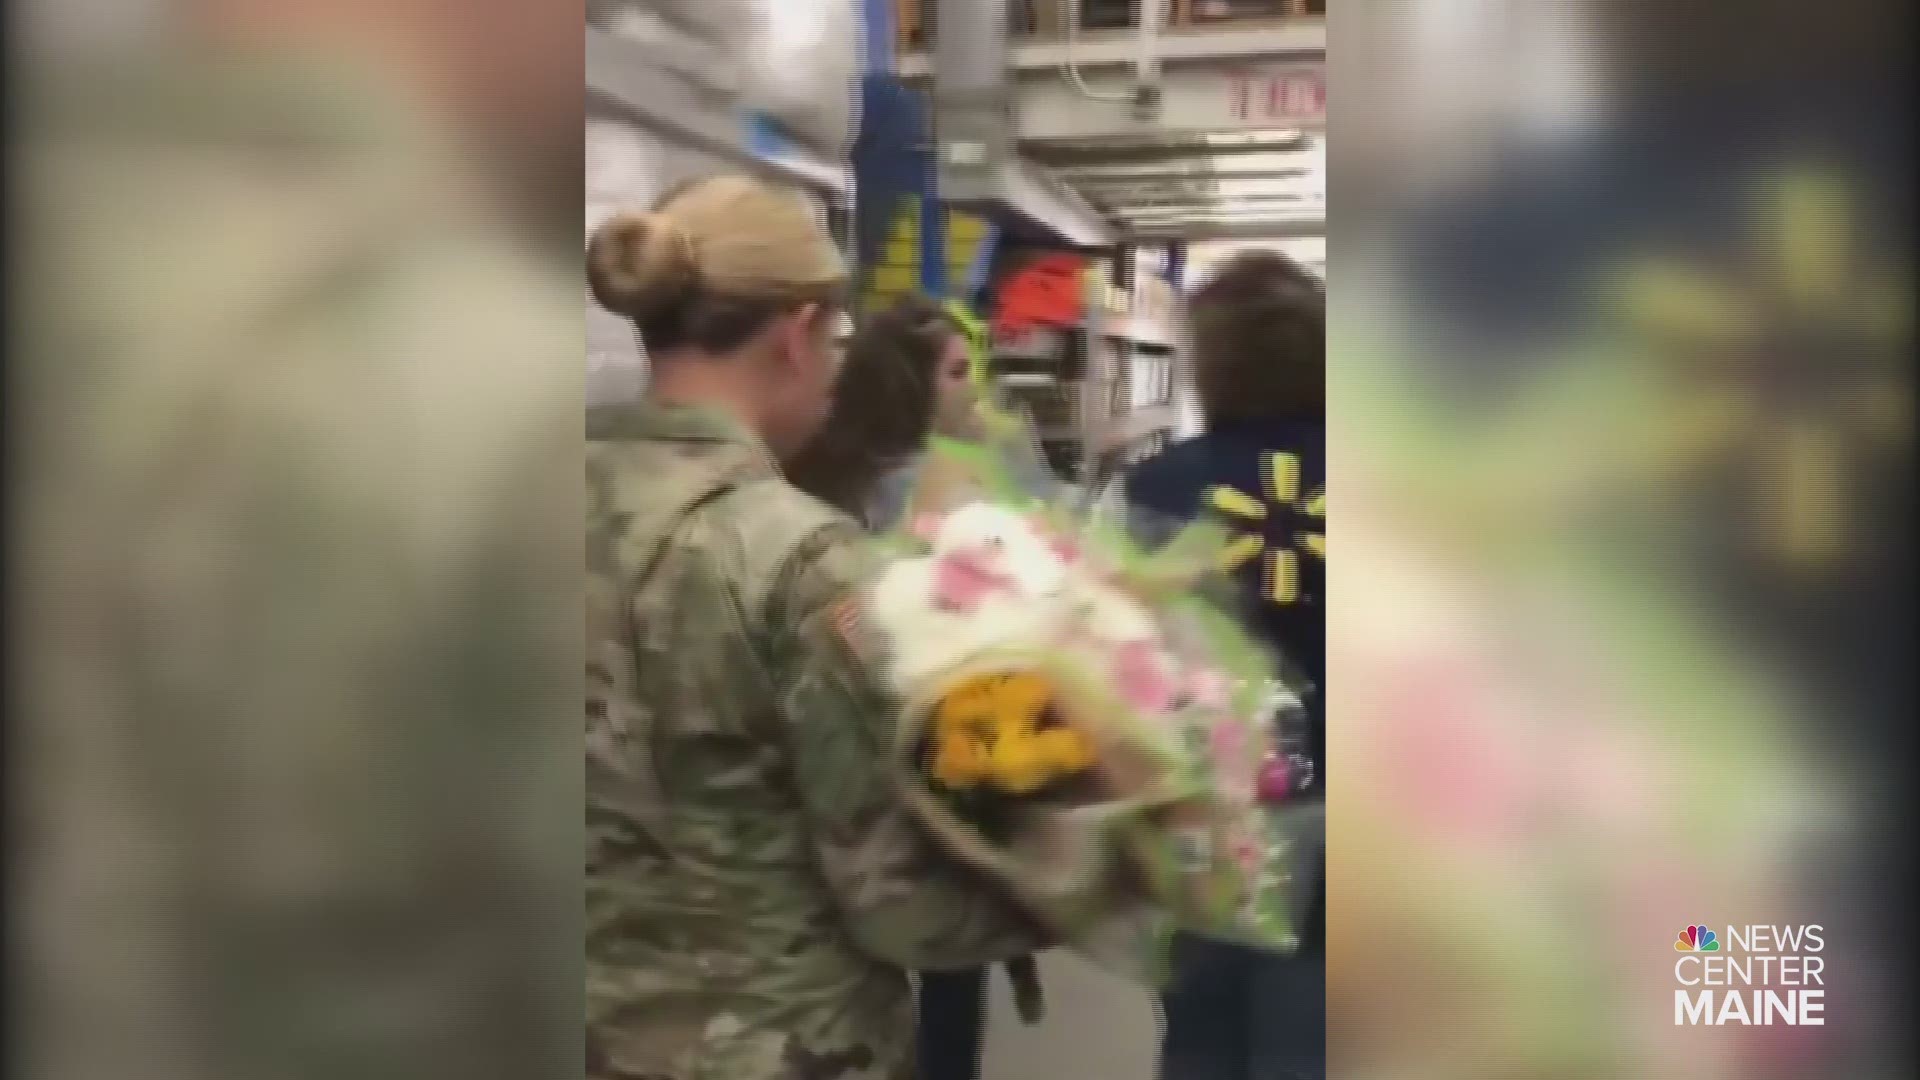 A Lincoln woman was surprised Wednesday by her daughter who had been stationed in South Korea for a year.